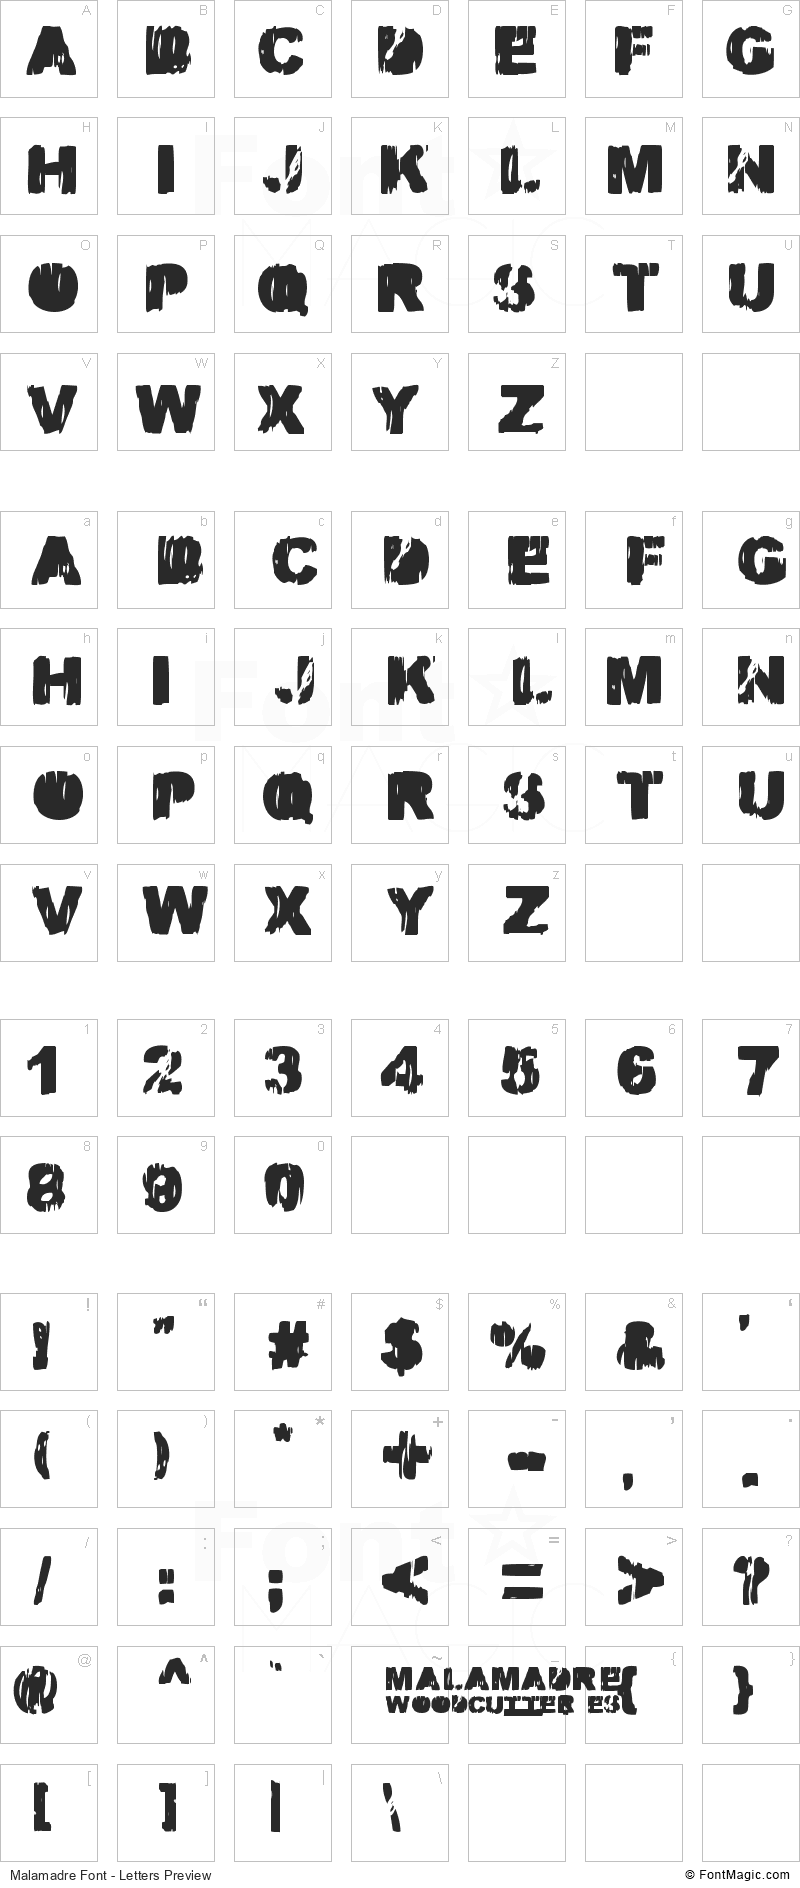 Malamadre Font - All Latters Preview Chart